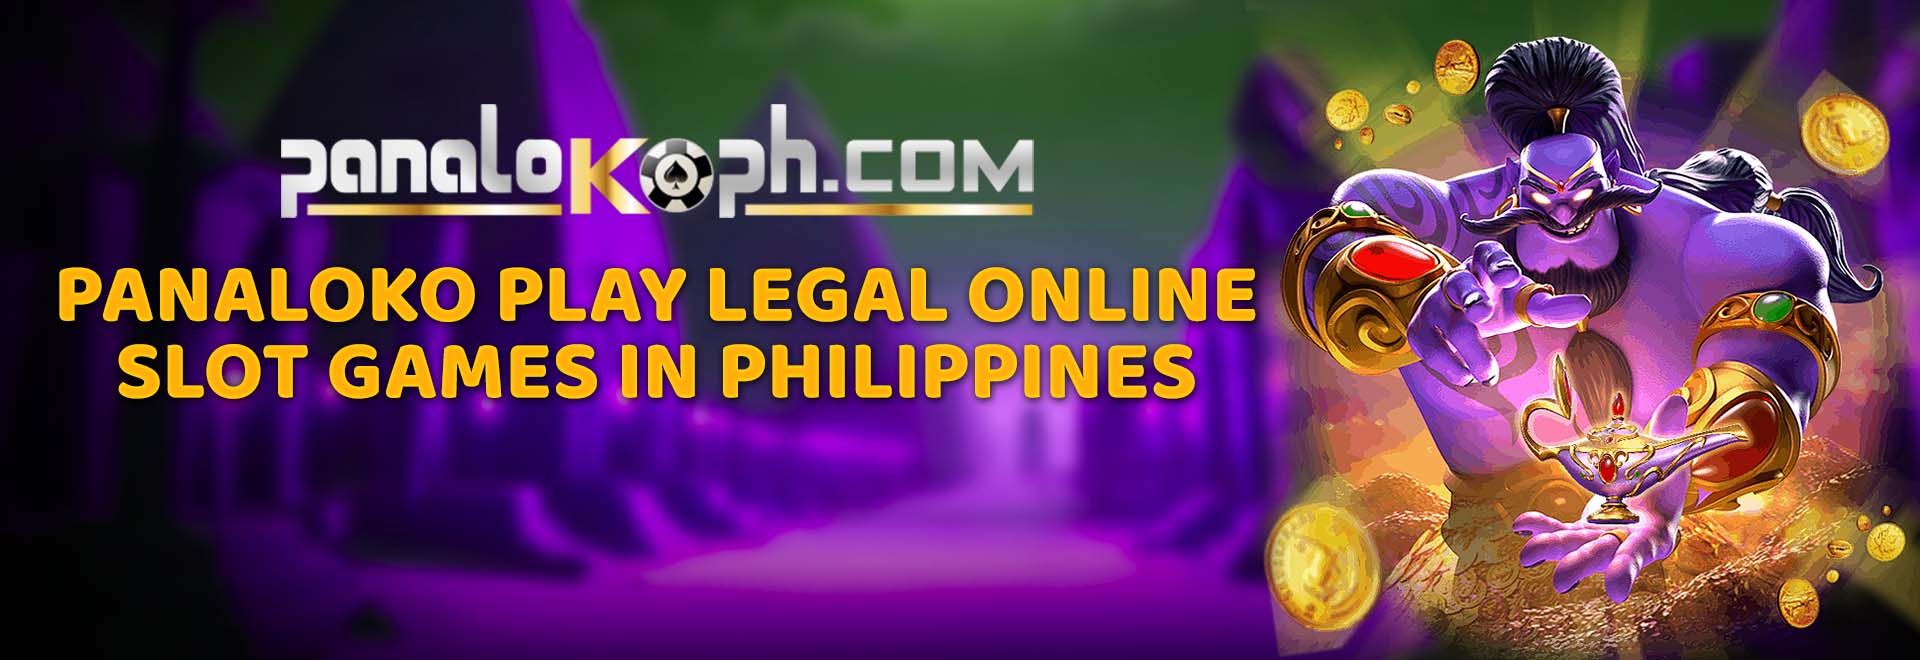 Panaloko - Play Legal Online Slot Games in Philippines